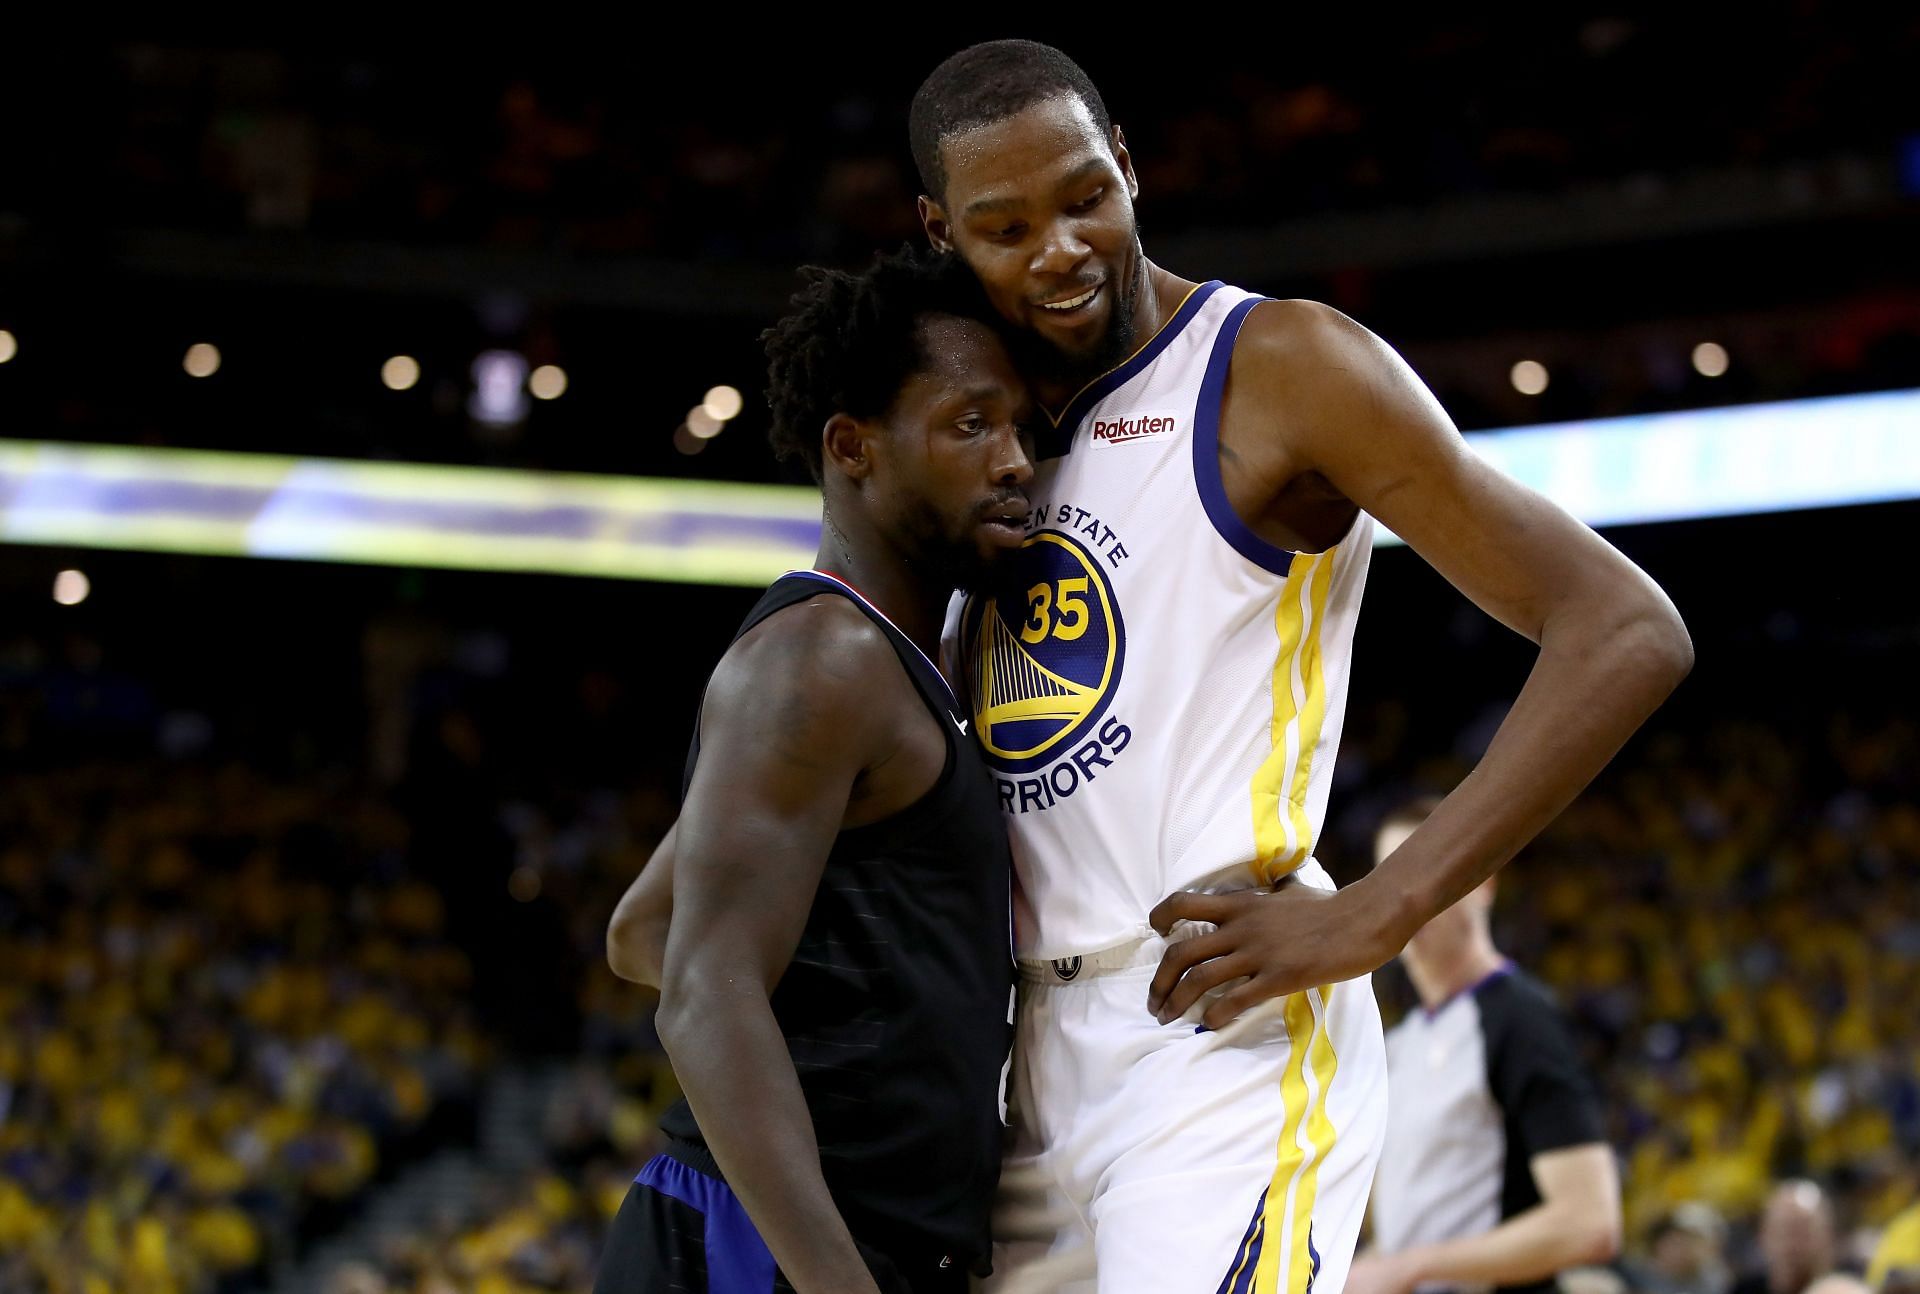 Patrick Beverley of the LA Clippers, left, plays tight defense on Kevin Durant of the Golden State Warriors in the 2019 NBA Finals.